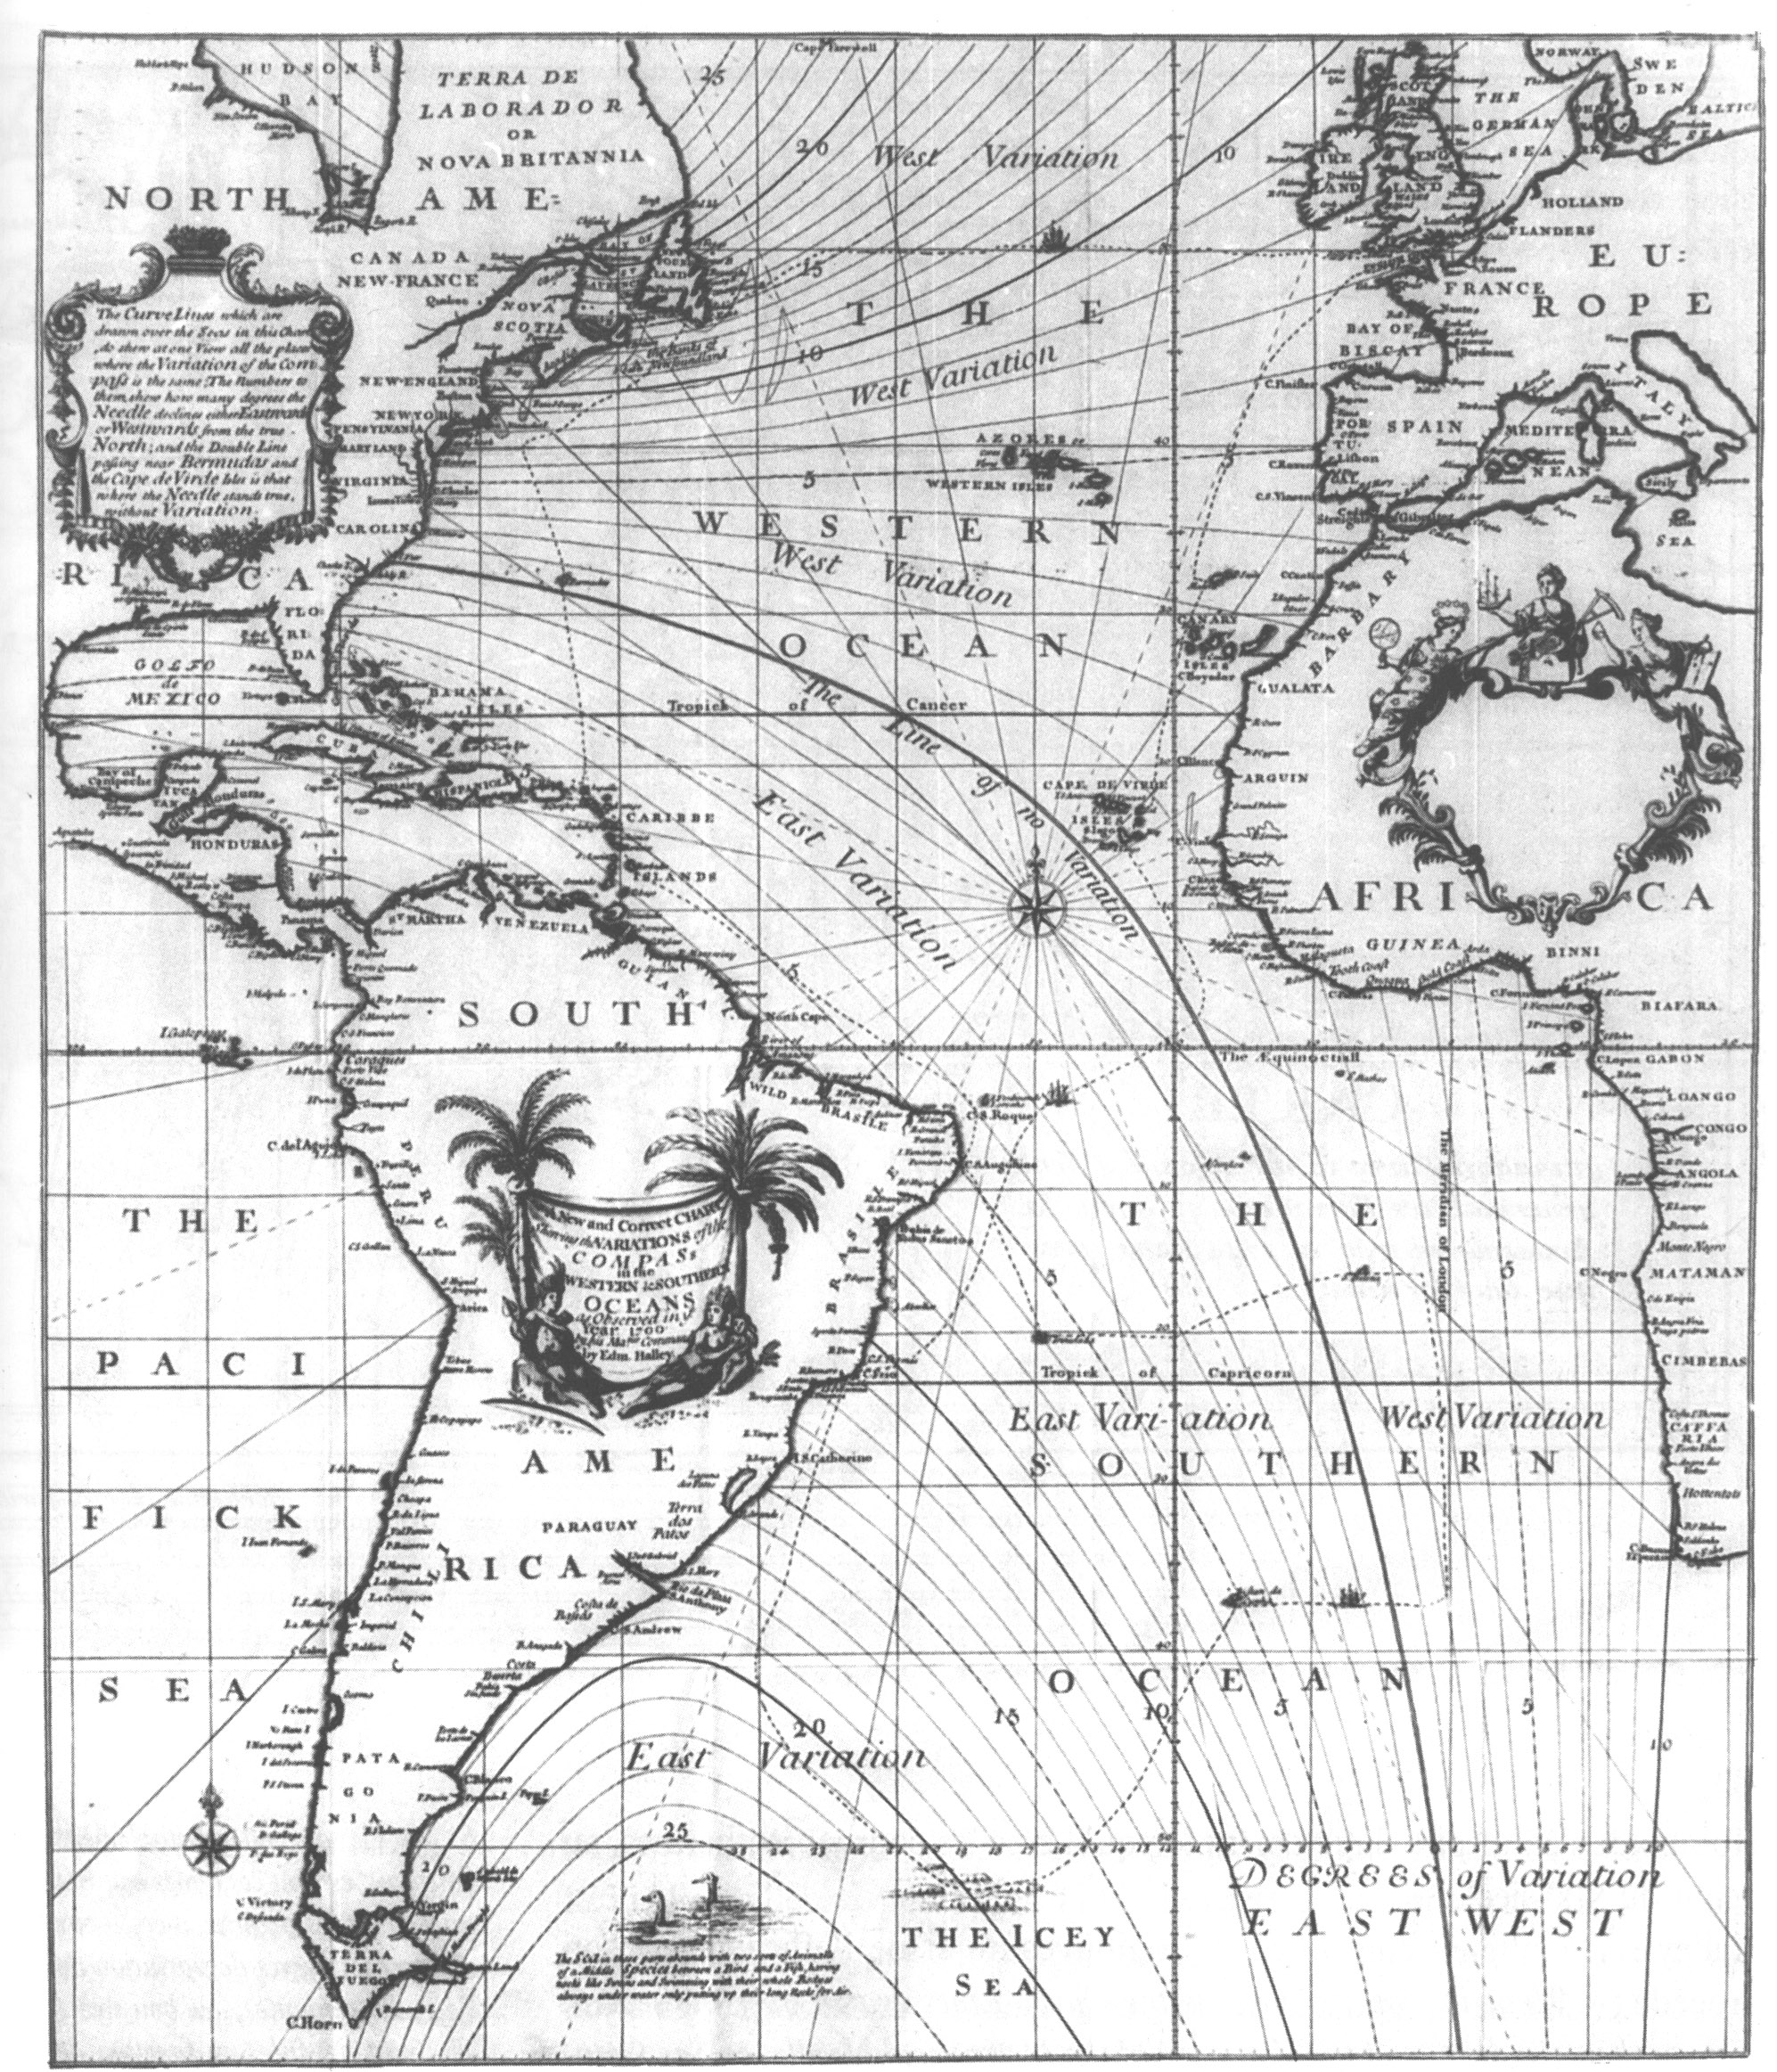 Contour map of magnetic declination: Edmund Halley drew lines of equal magnetic declination on a map, possibly the first contour map of a data-based variable.